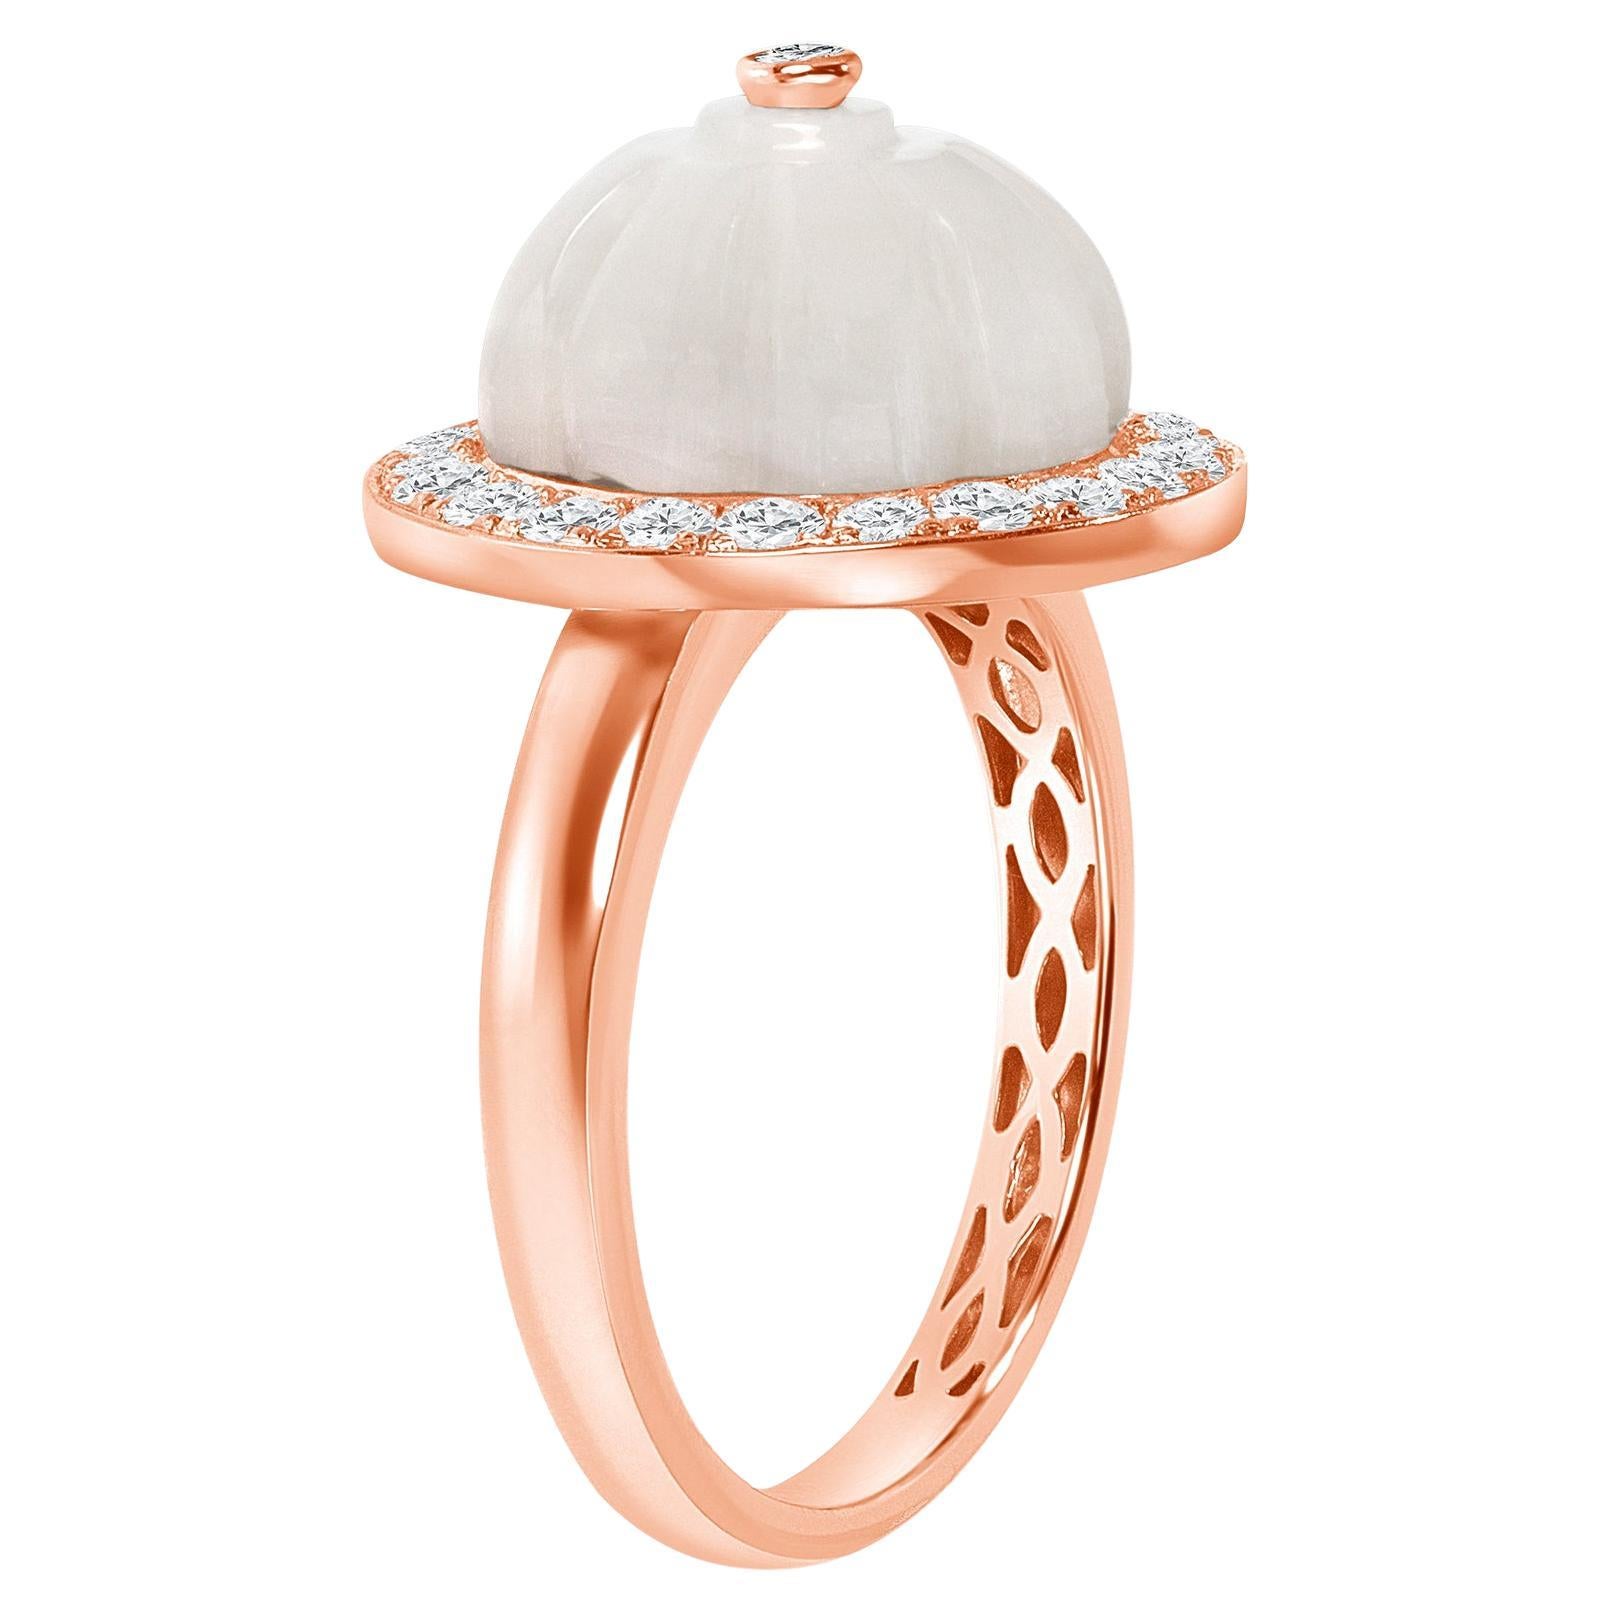 Step into sophistication with this unique ring, meticulously fashioned in luxurious 14k gold, showcasing a mesmerizing mother-of-pearl gemstone encircled by shimmering diamonds. Its exquisite design exudes elegance and style, making it the perfect